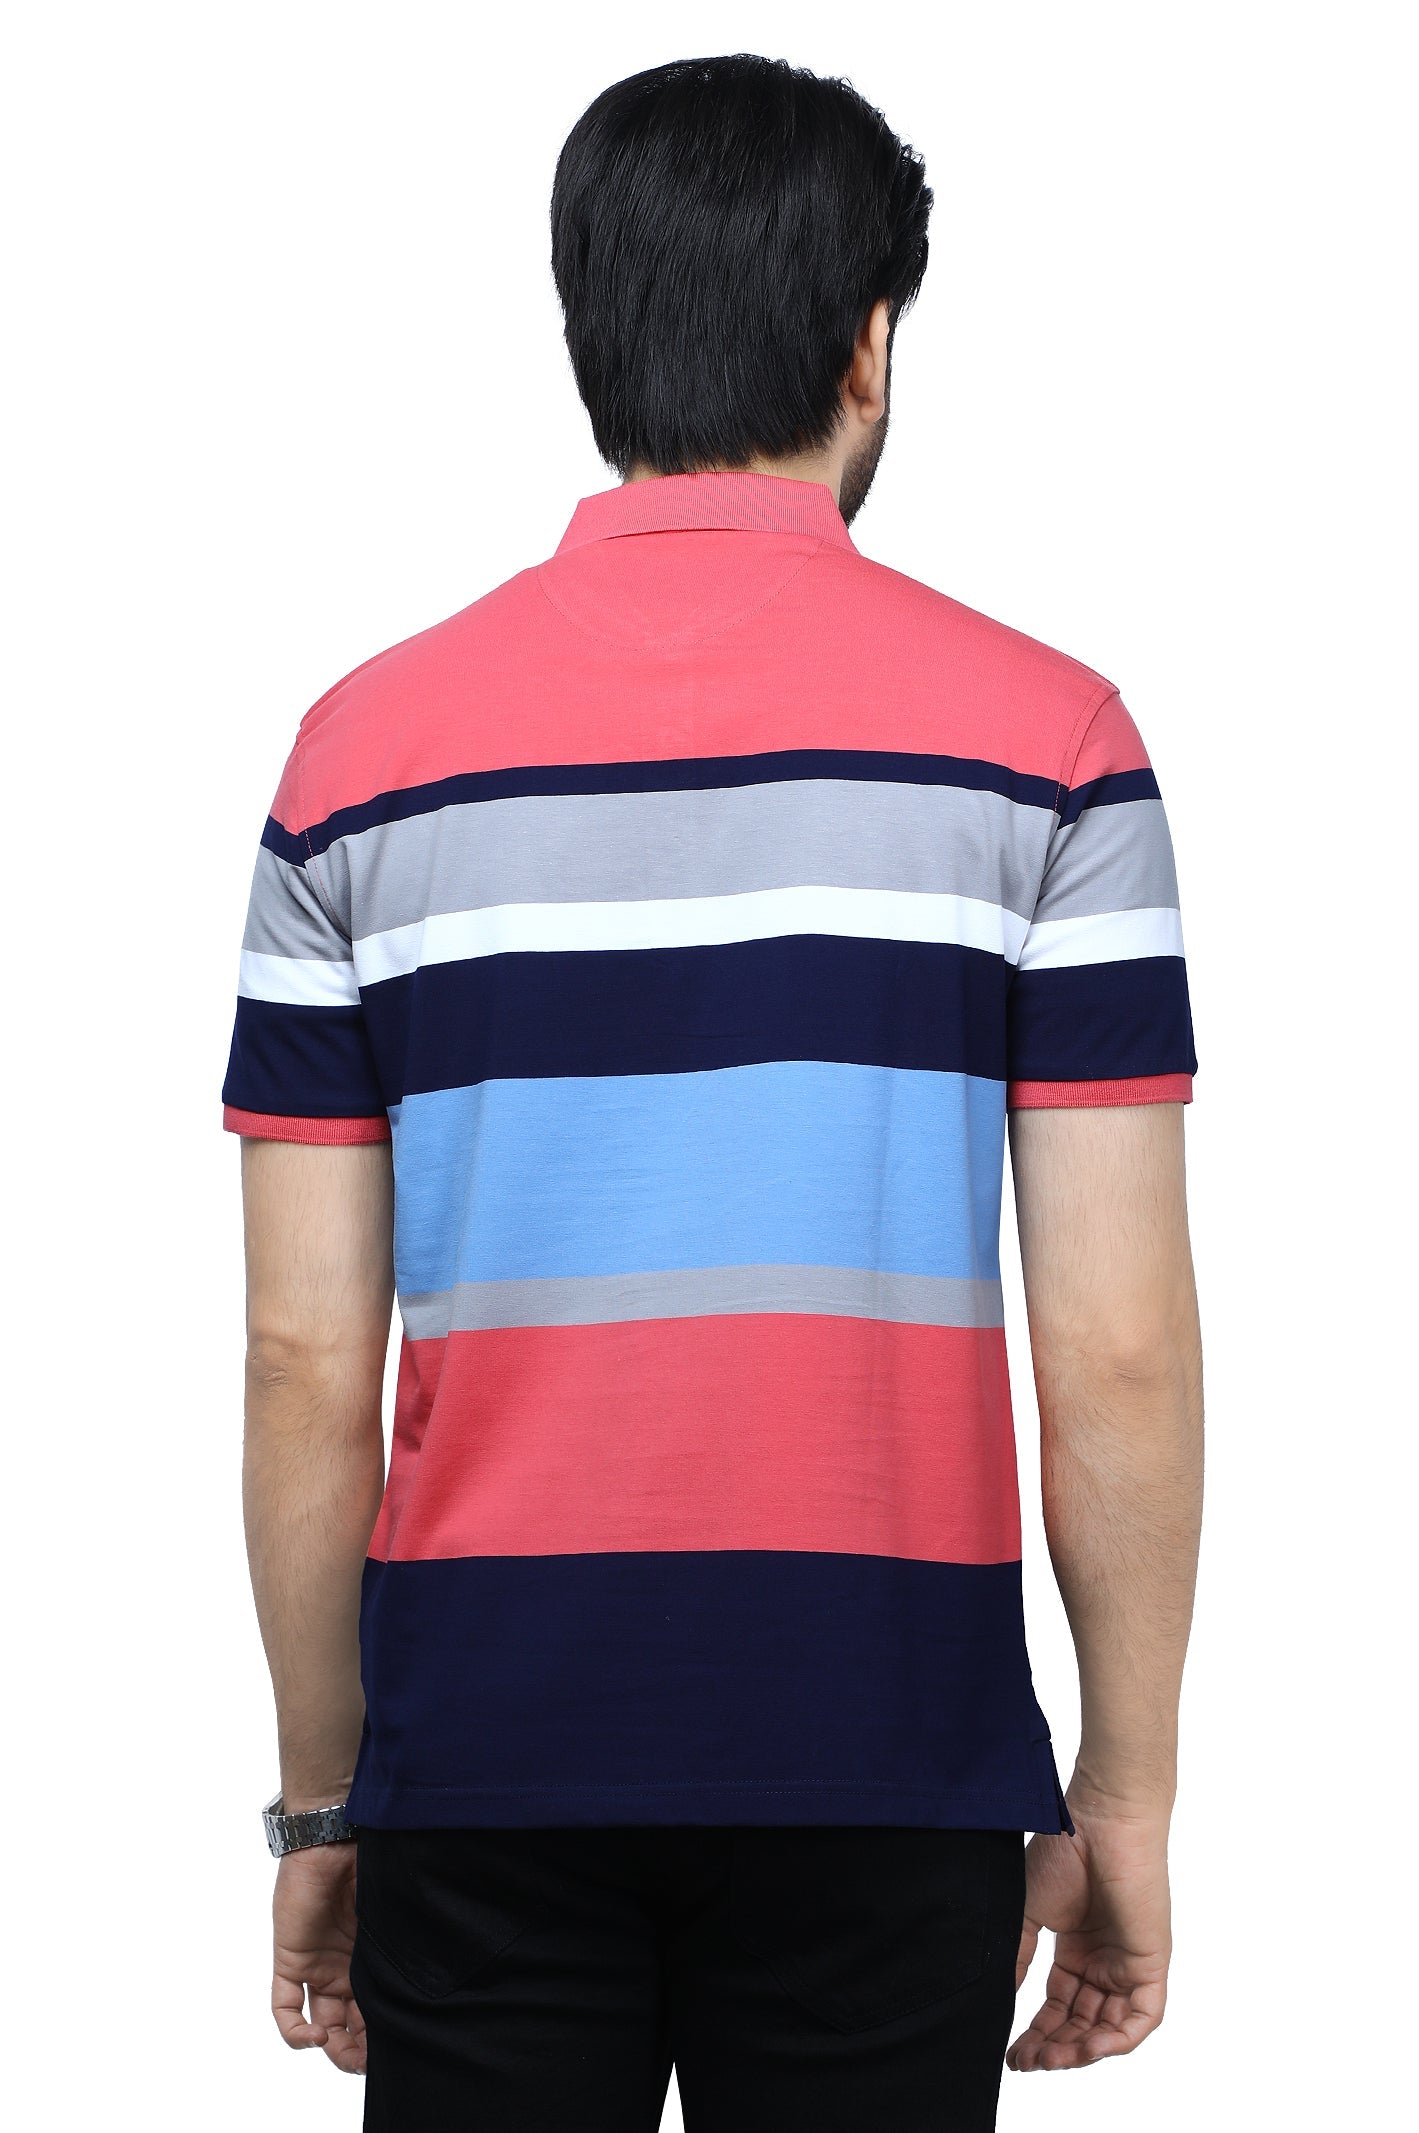 Diners Men's Polo T-Shirt SKU: NA895-PINK - Diners